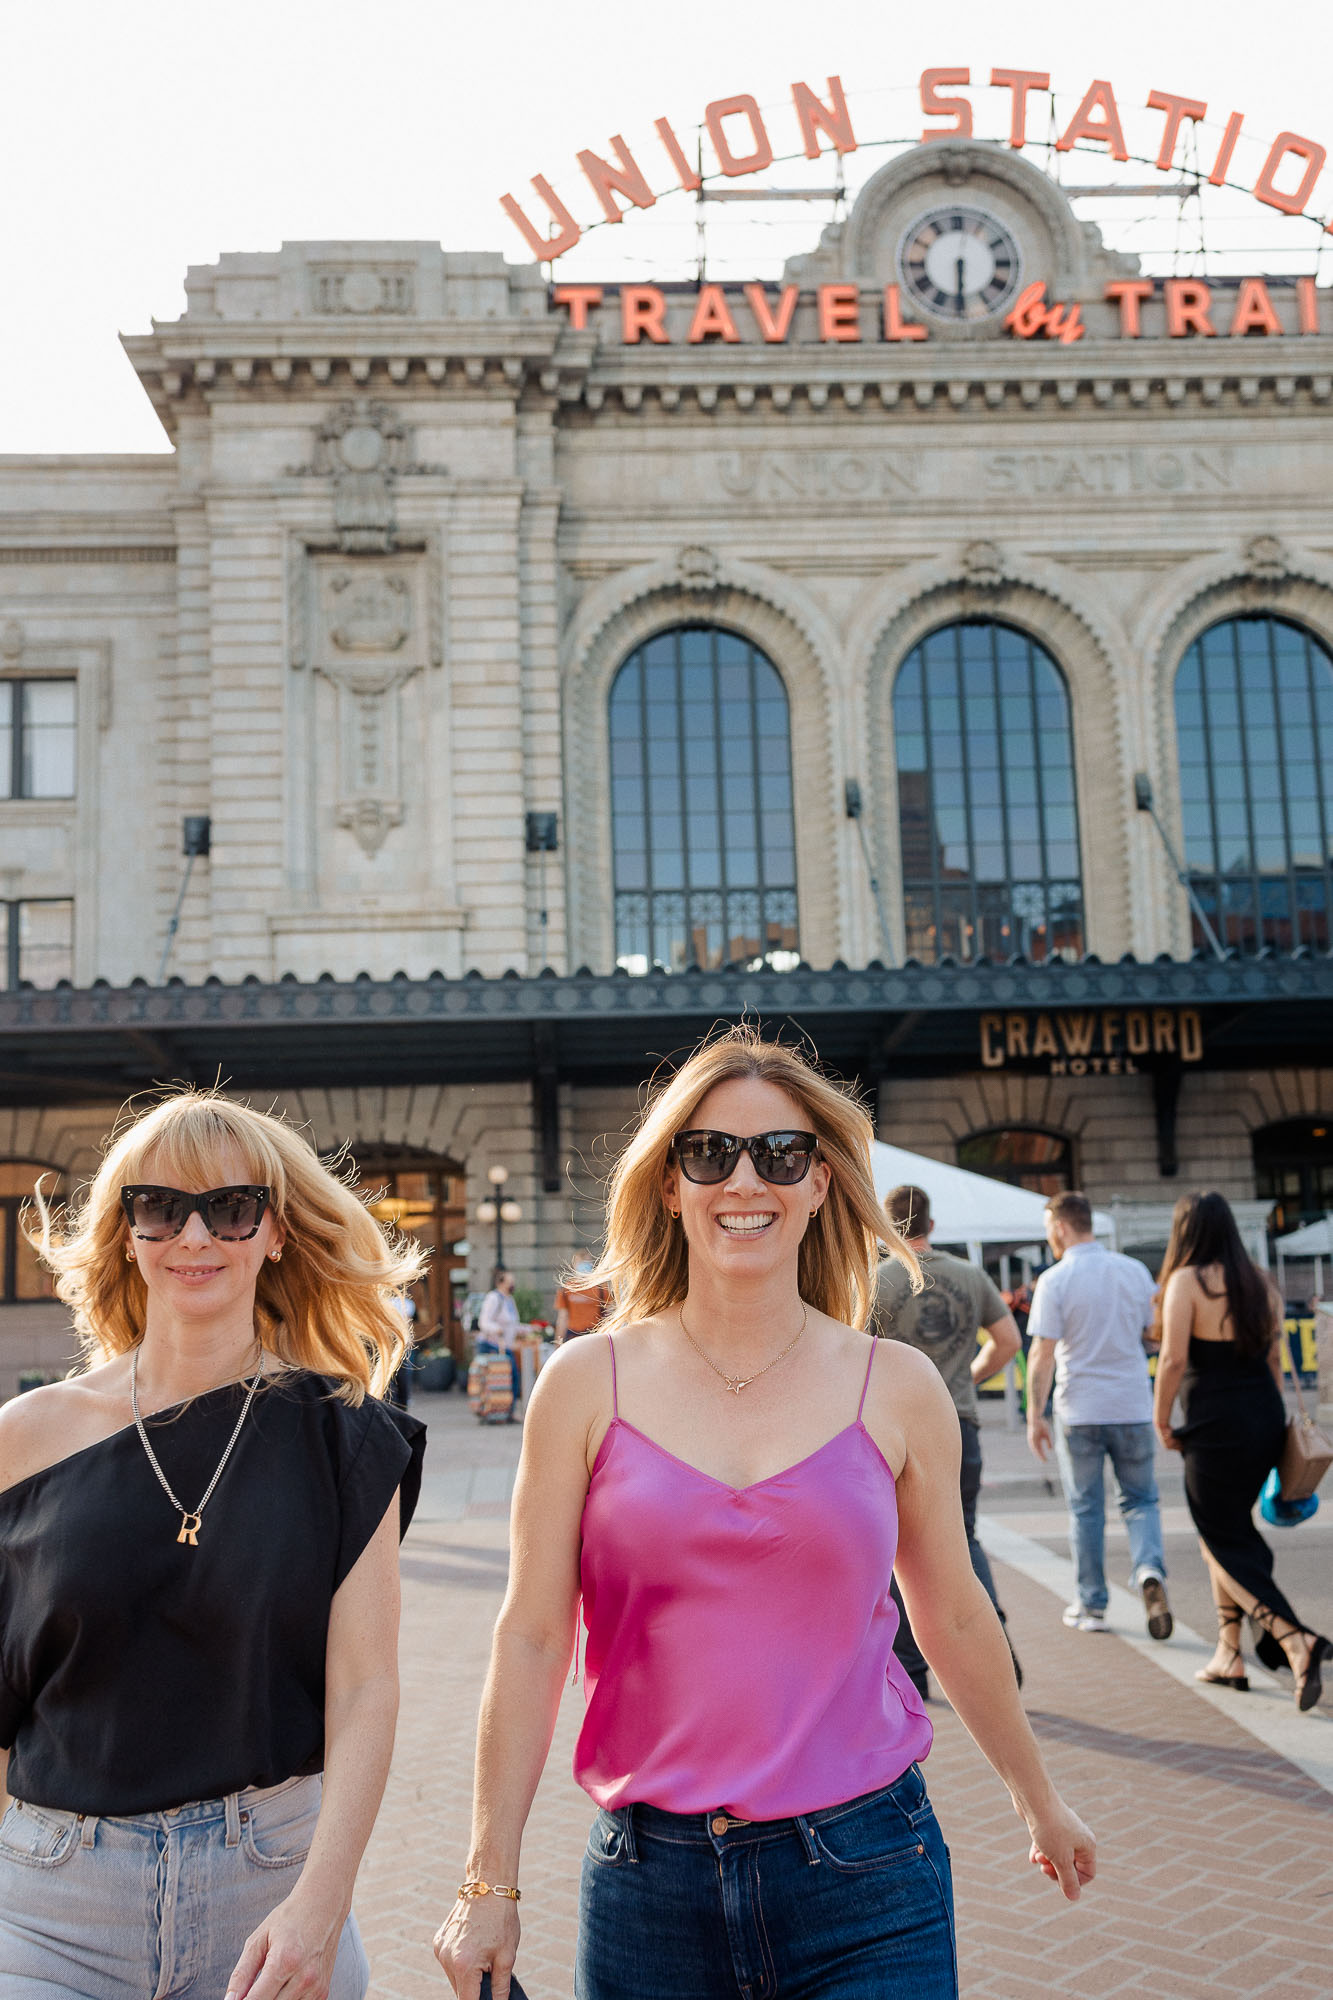 Saks Friends and Family Sale! Tammy & Rachel walking in front of Union Station wearing heels, jeans and sexy tops.